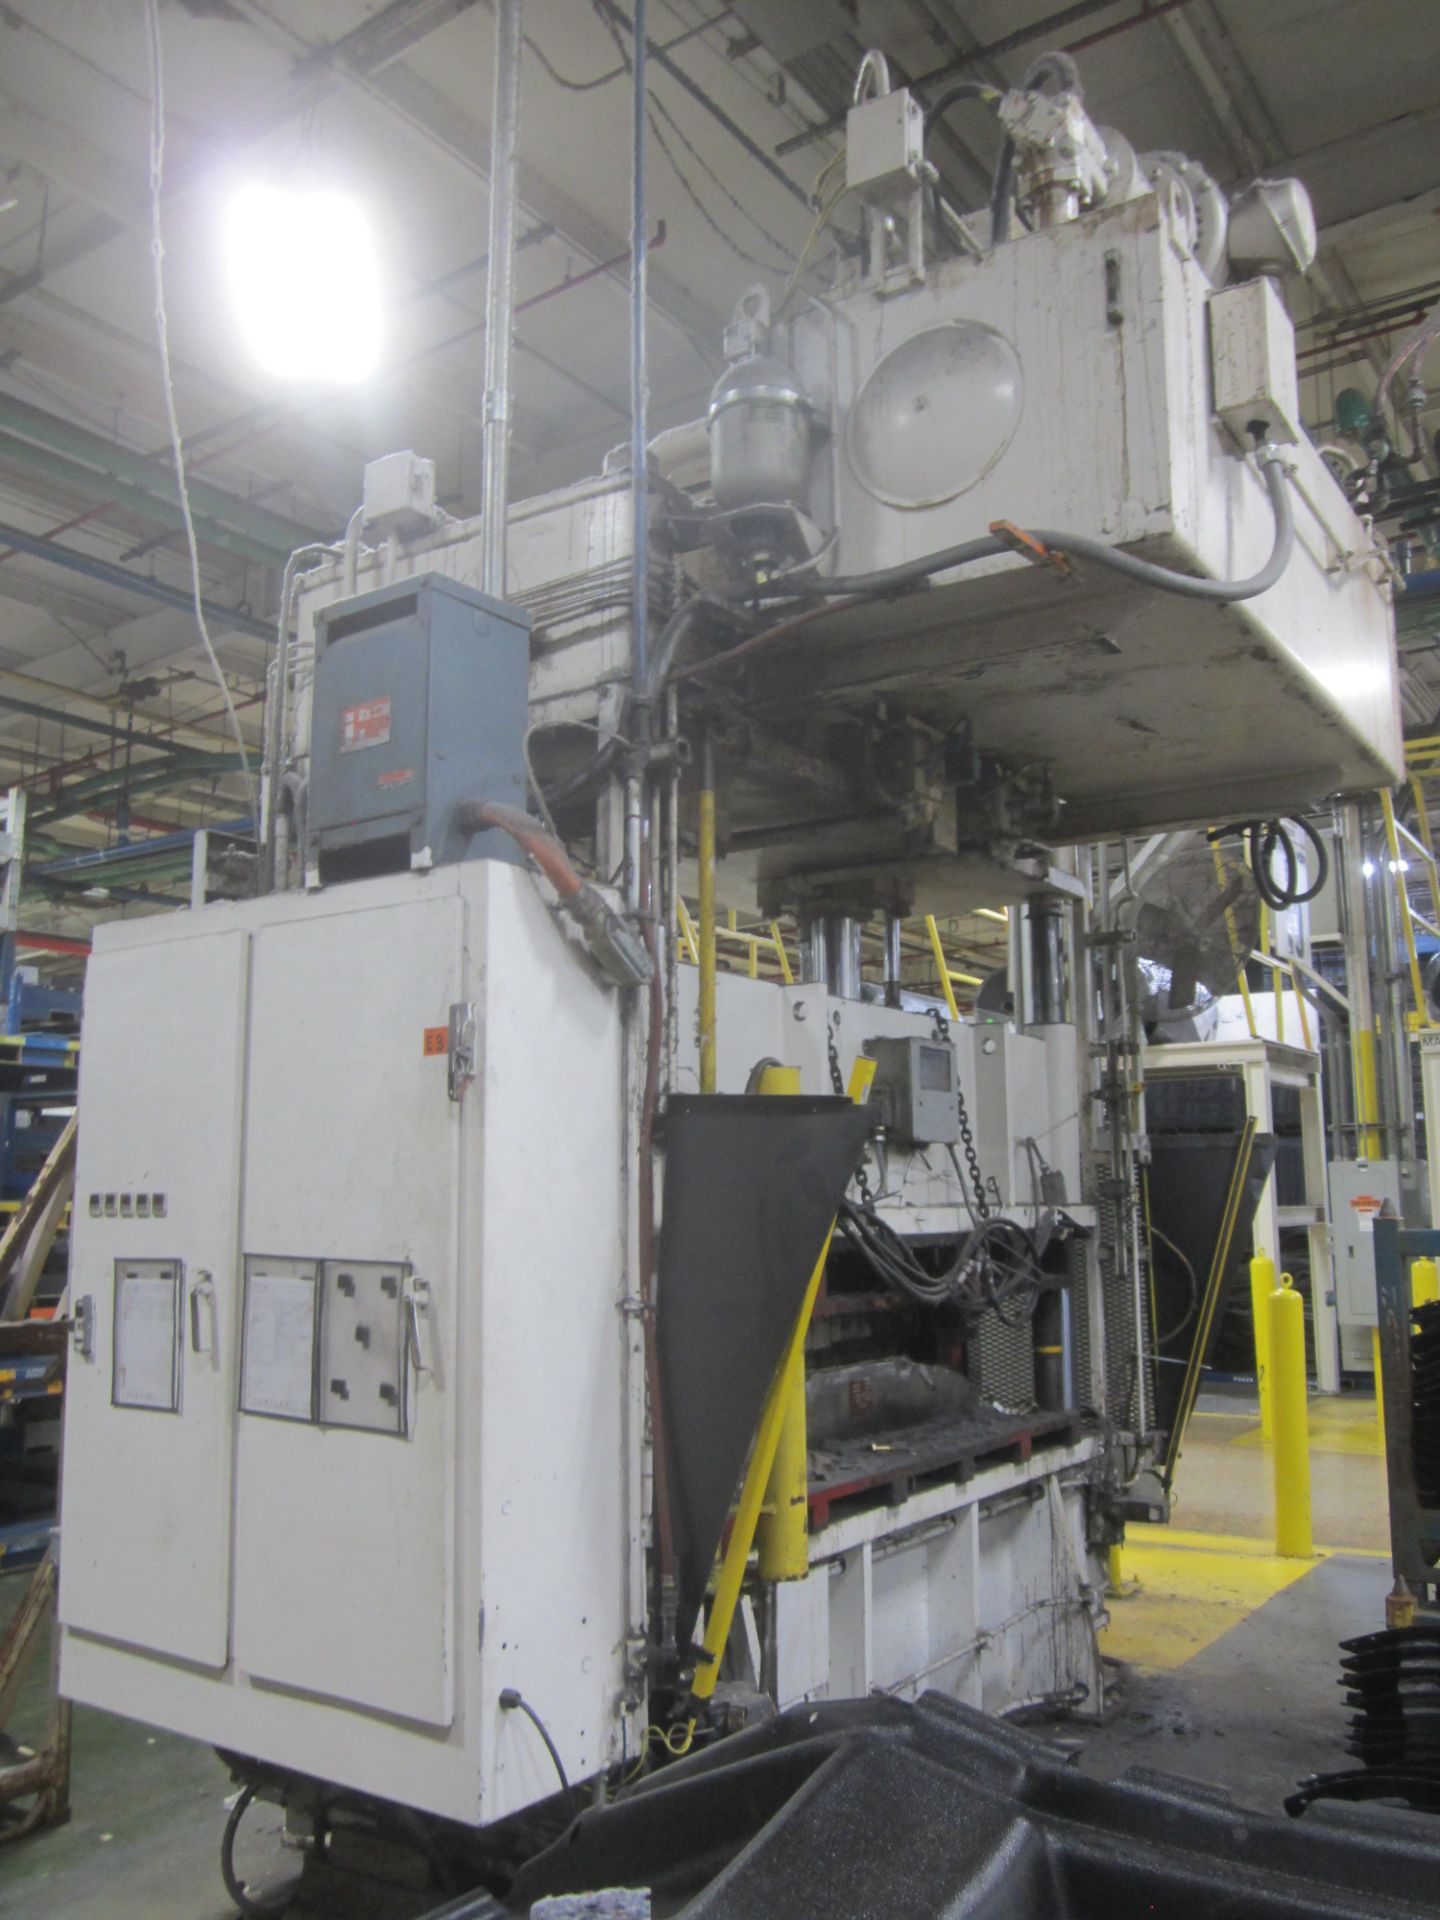 St. Lawrence 100 Ton Hydraulic Press, 4-Post, 114" X 50" Bed and Ram Area, 100" X 36" Between the - Image 8 of 9